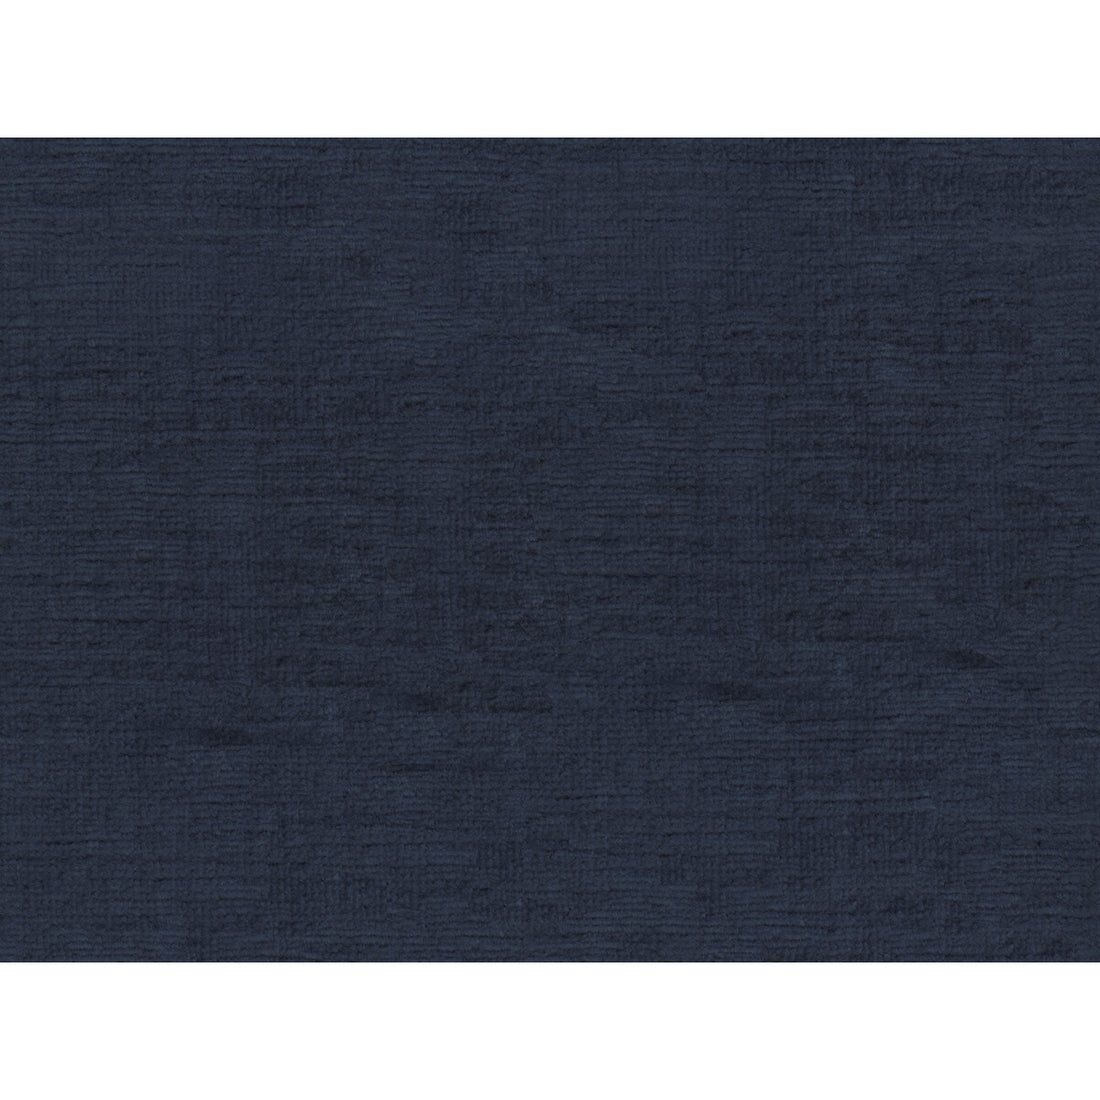 Fulham Linen V fabric in navy color - pattern 2016133.510.0 - by Lee Jofa